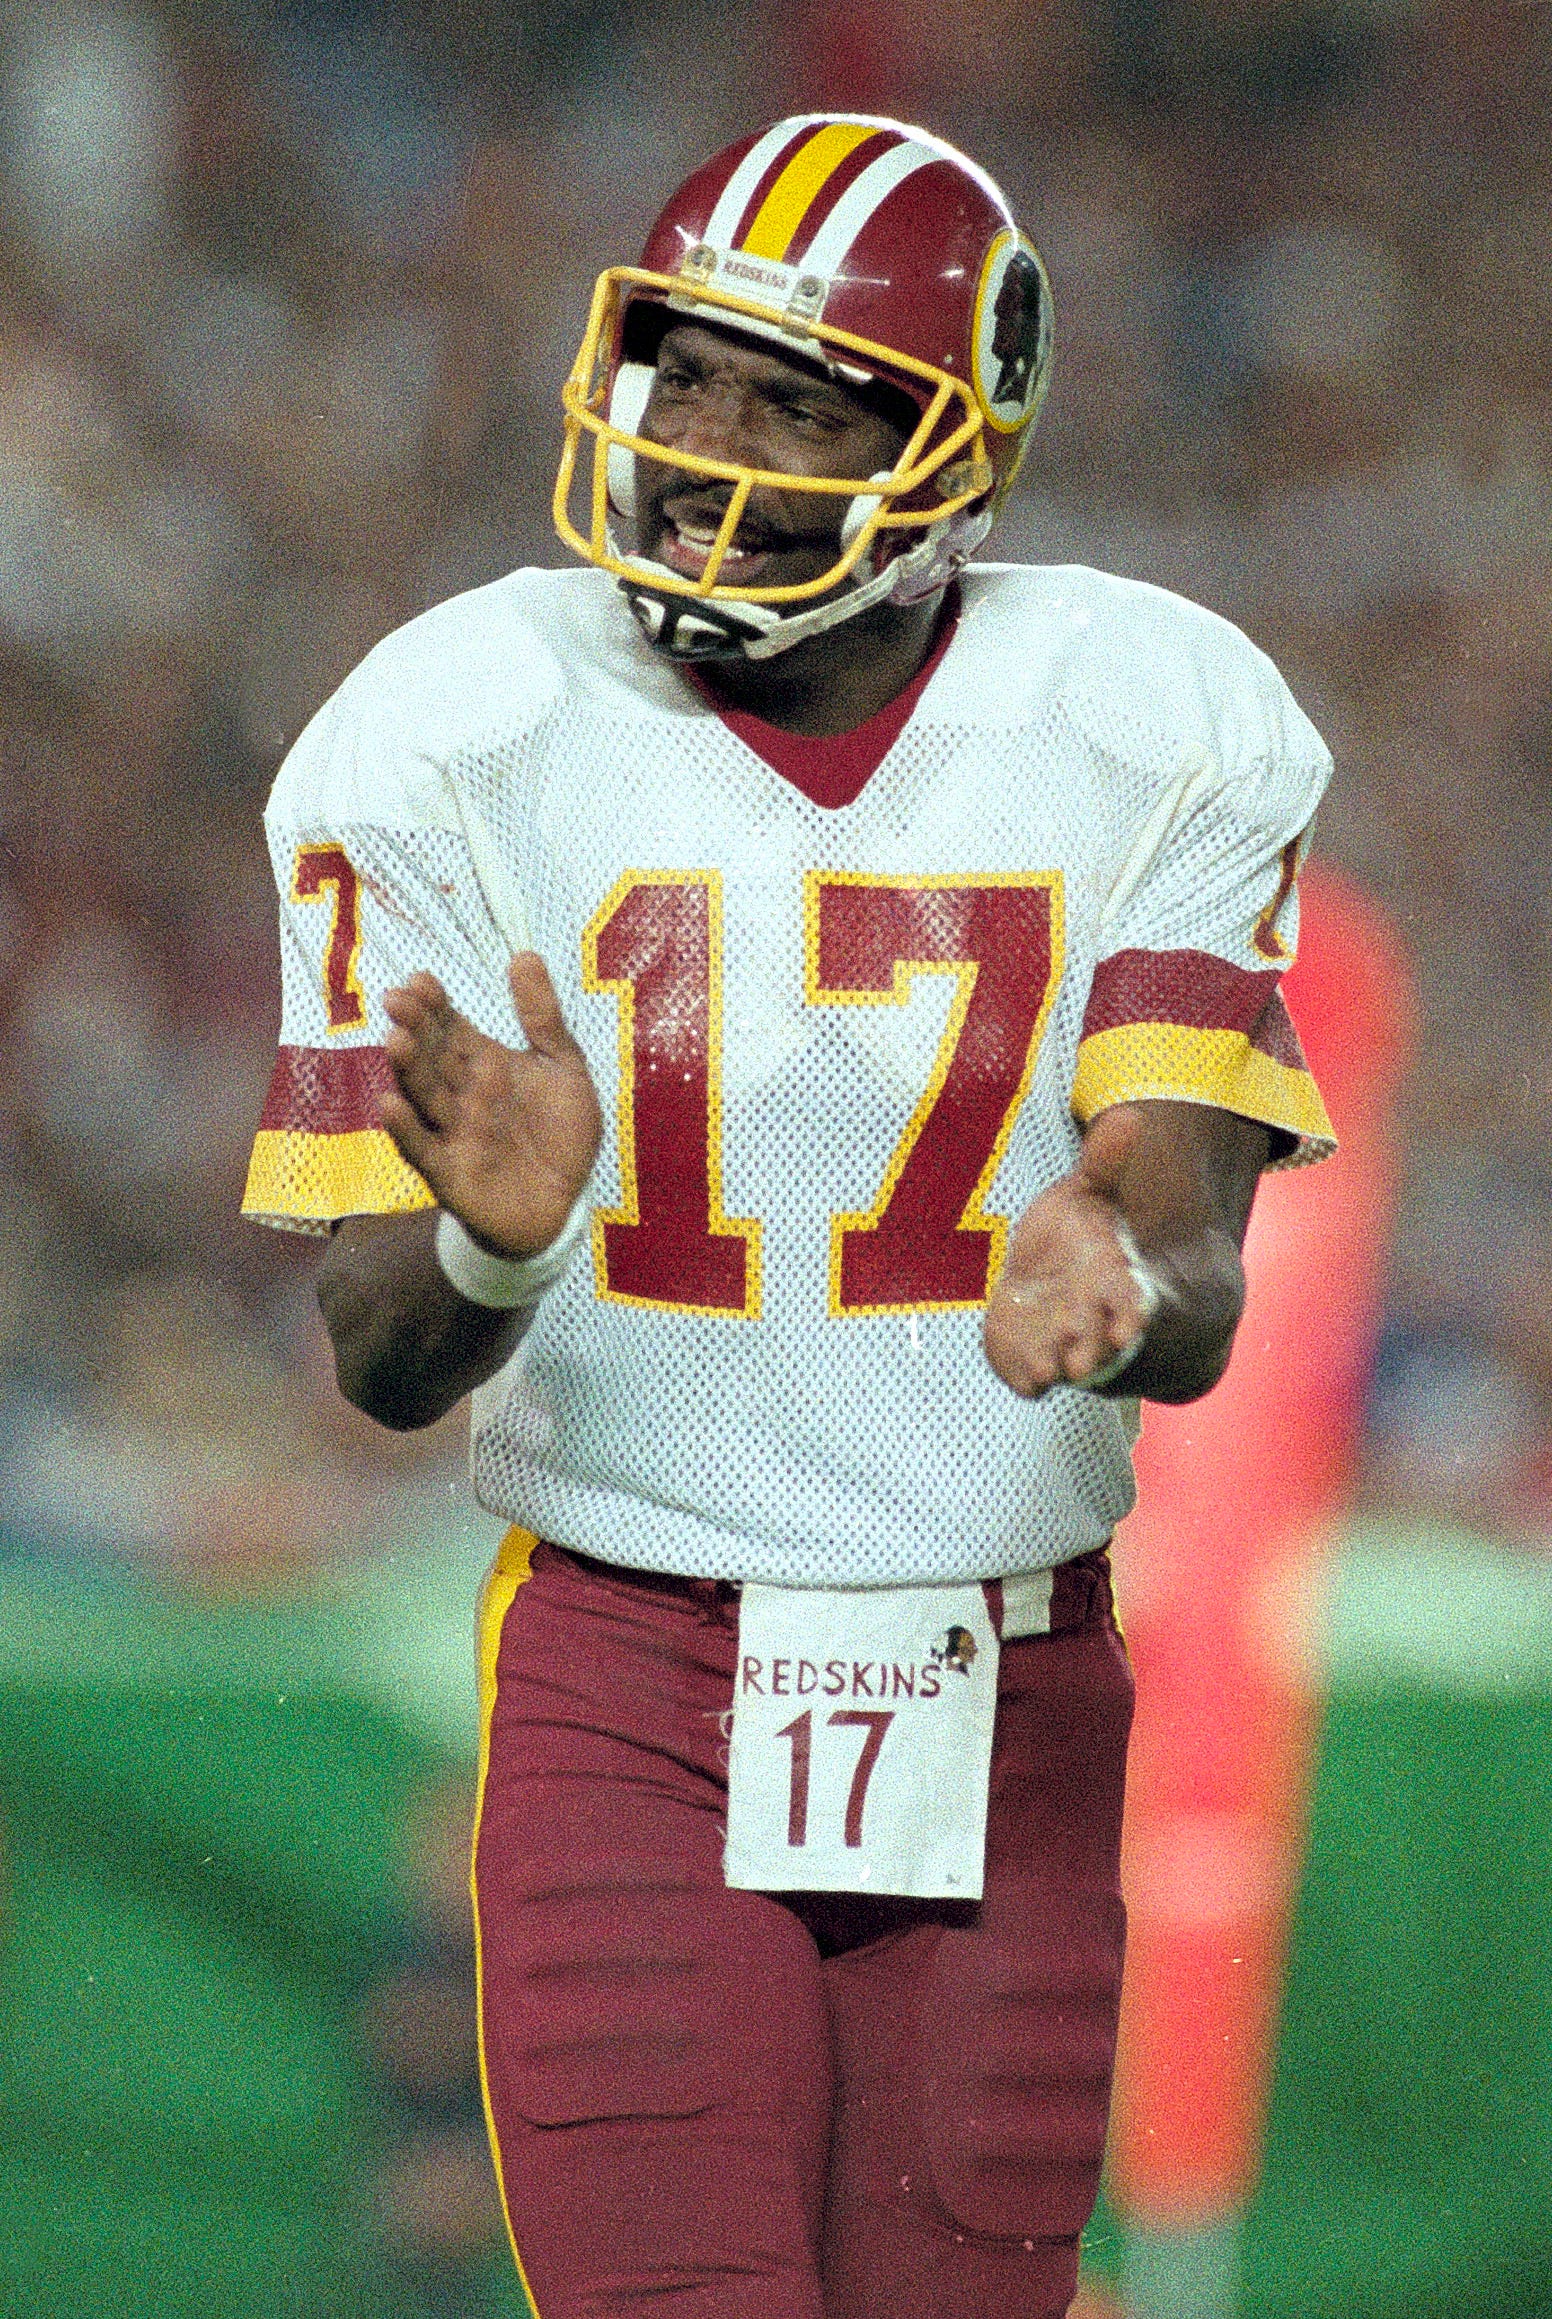 The story of Doug Williams, celebrated now, was hardly a fairy tale: He faced ugly racism